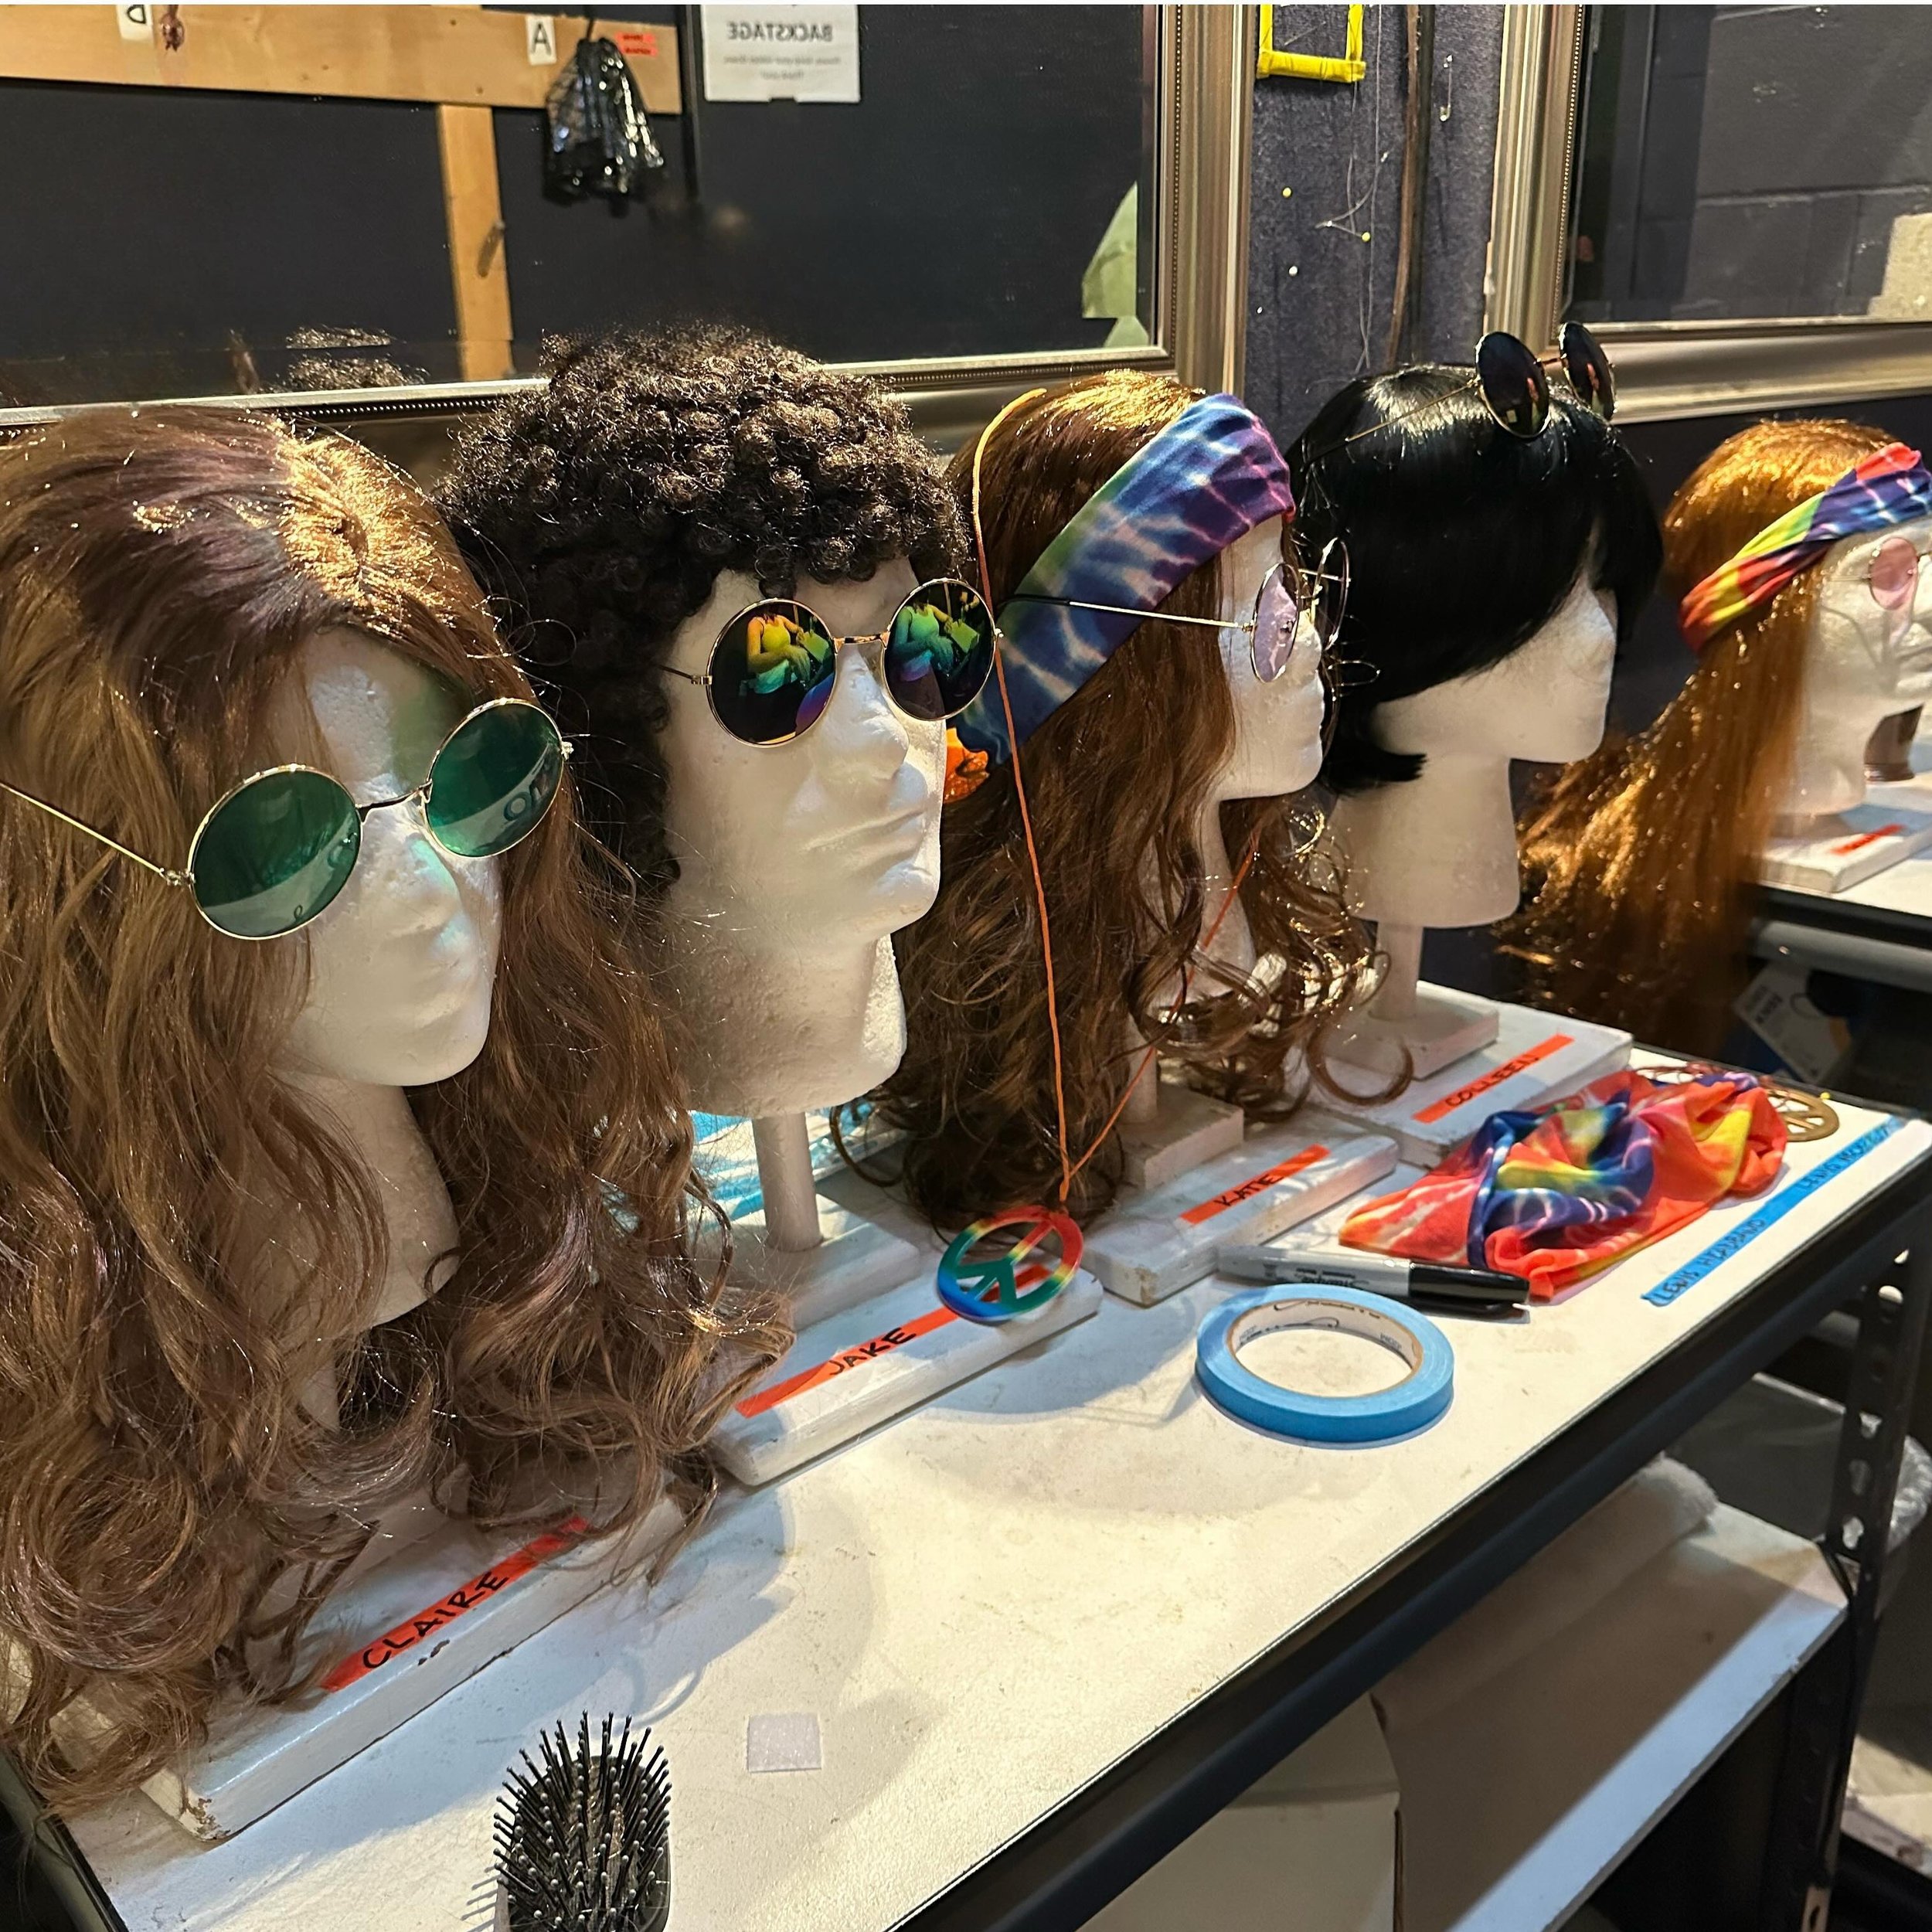 All the cool kids will be at #OdysseyABLE today at 2pm. See you at @chicagoshakes! Just a handful of tickets left at ableensemble.com/events
.
.
.
[ID: backstage at the courtyard theatre, 5 foam heads line a set of prop shelves. Each he adds has a wi